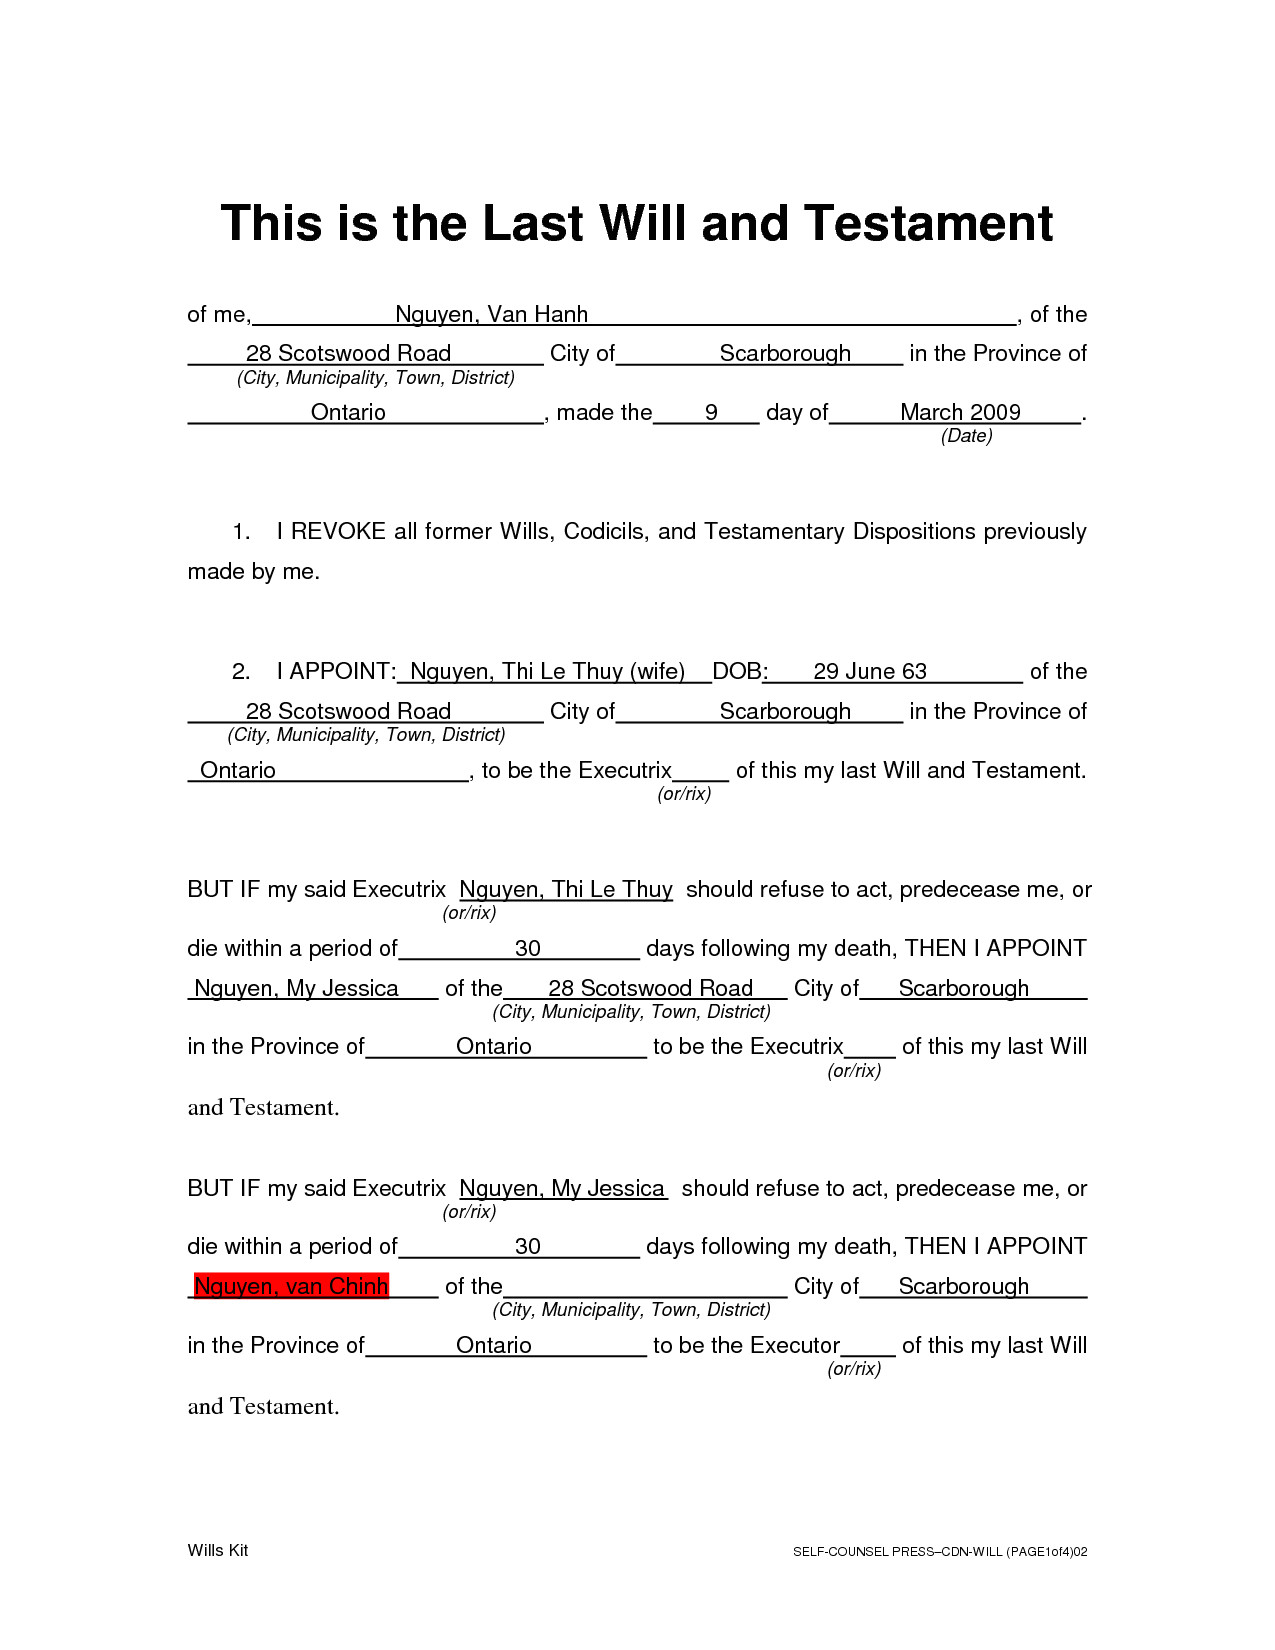 Last Will and Testament Template Ontario Best Photos Of Will and Testament Sample Sections Sample